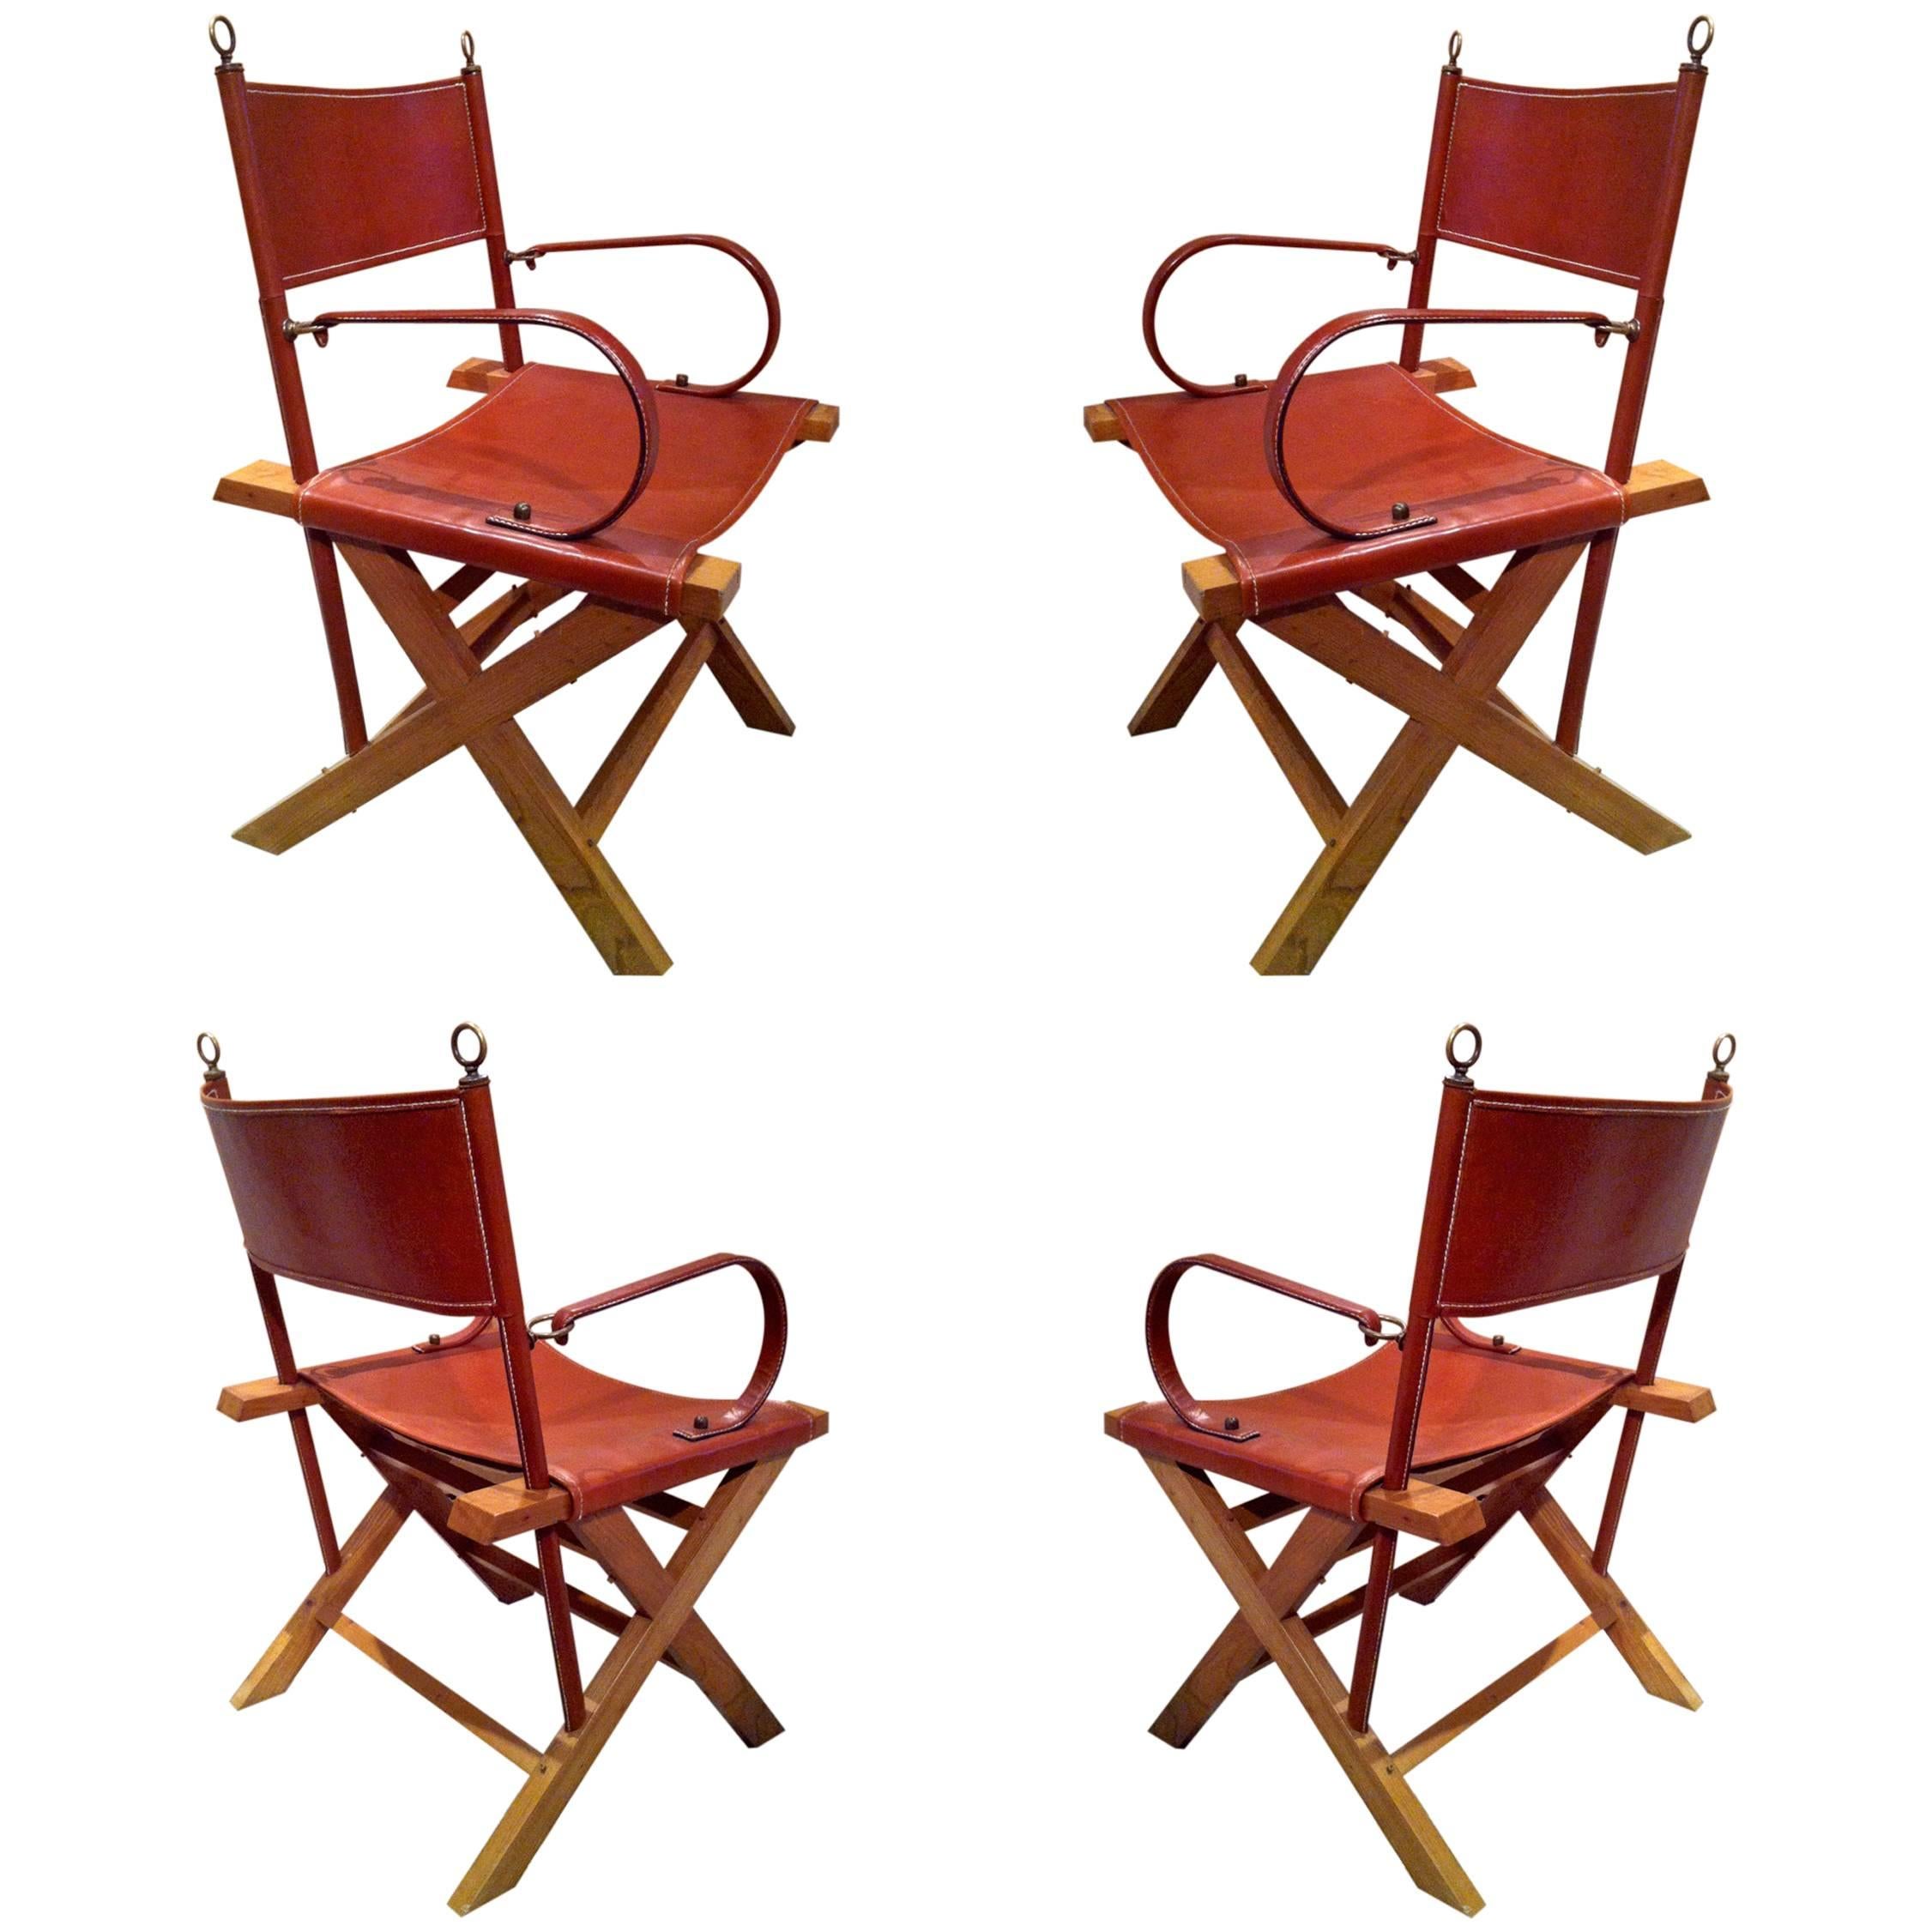 Jacques Adnet Rarest and Exceptional Four Armchairs Set in Hand-Stitched Leather